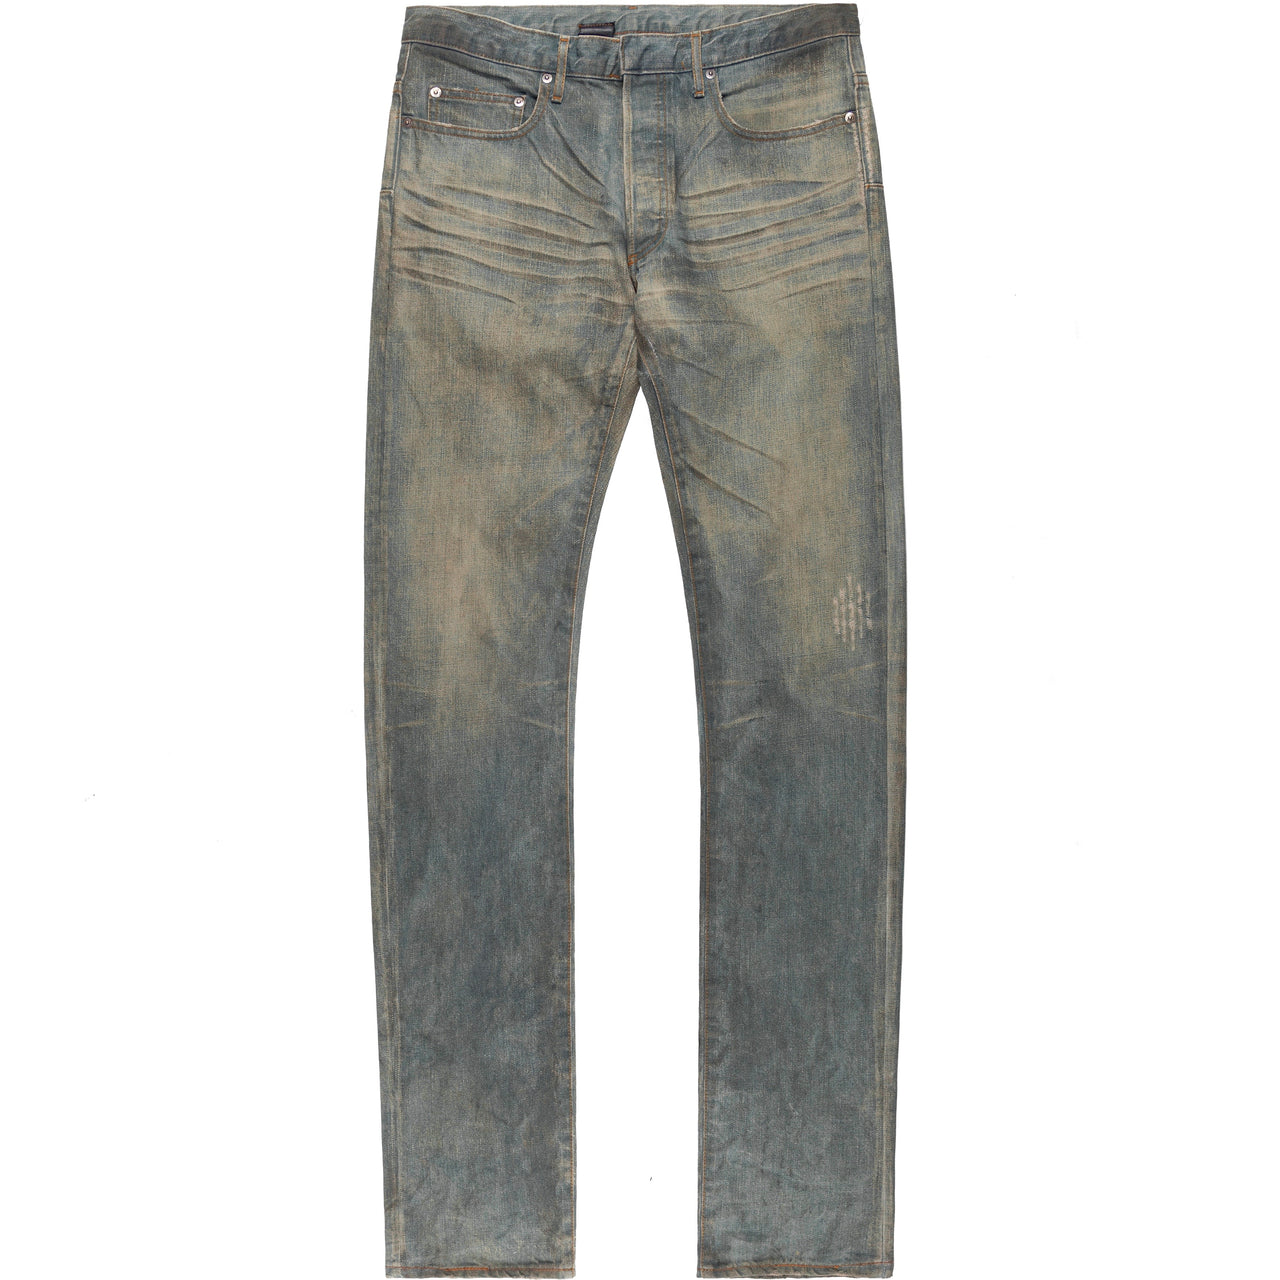 Dior Homme Claw Mark Jeans - SS04 “Strip”